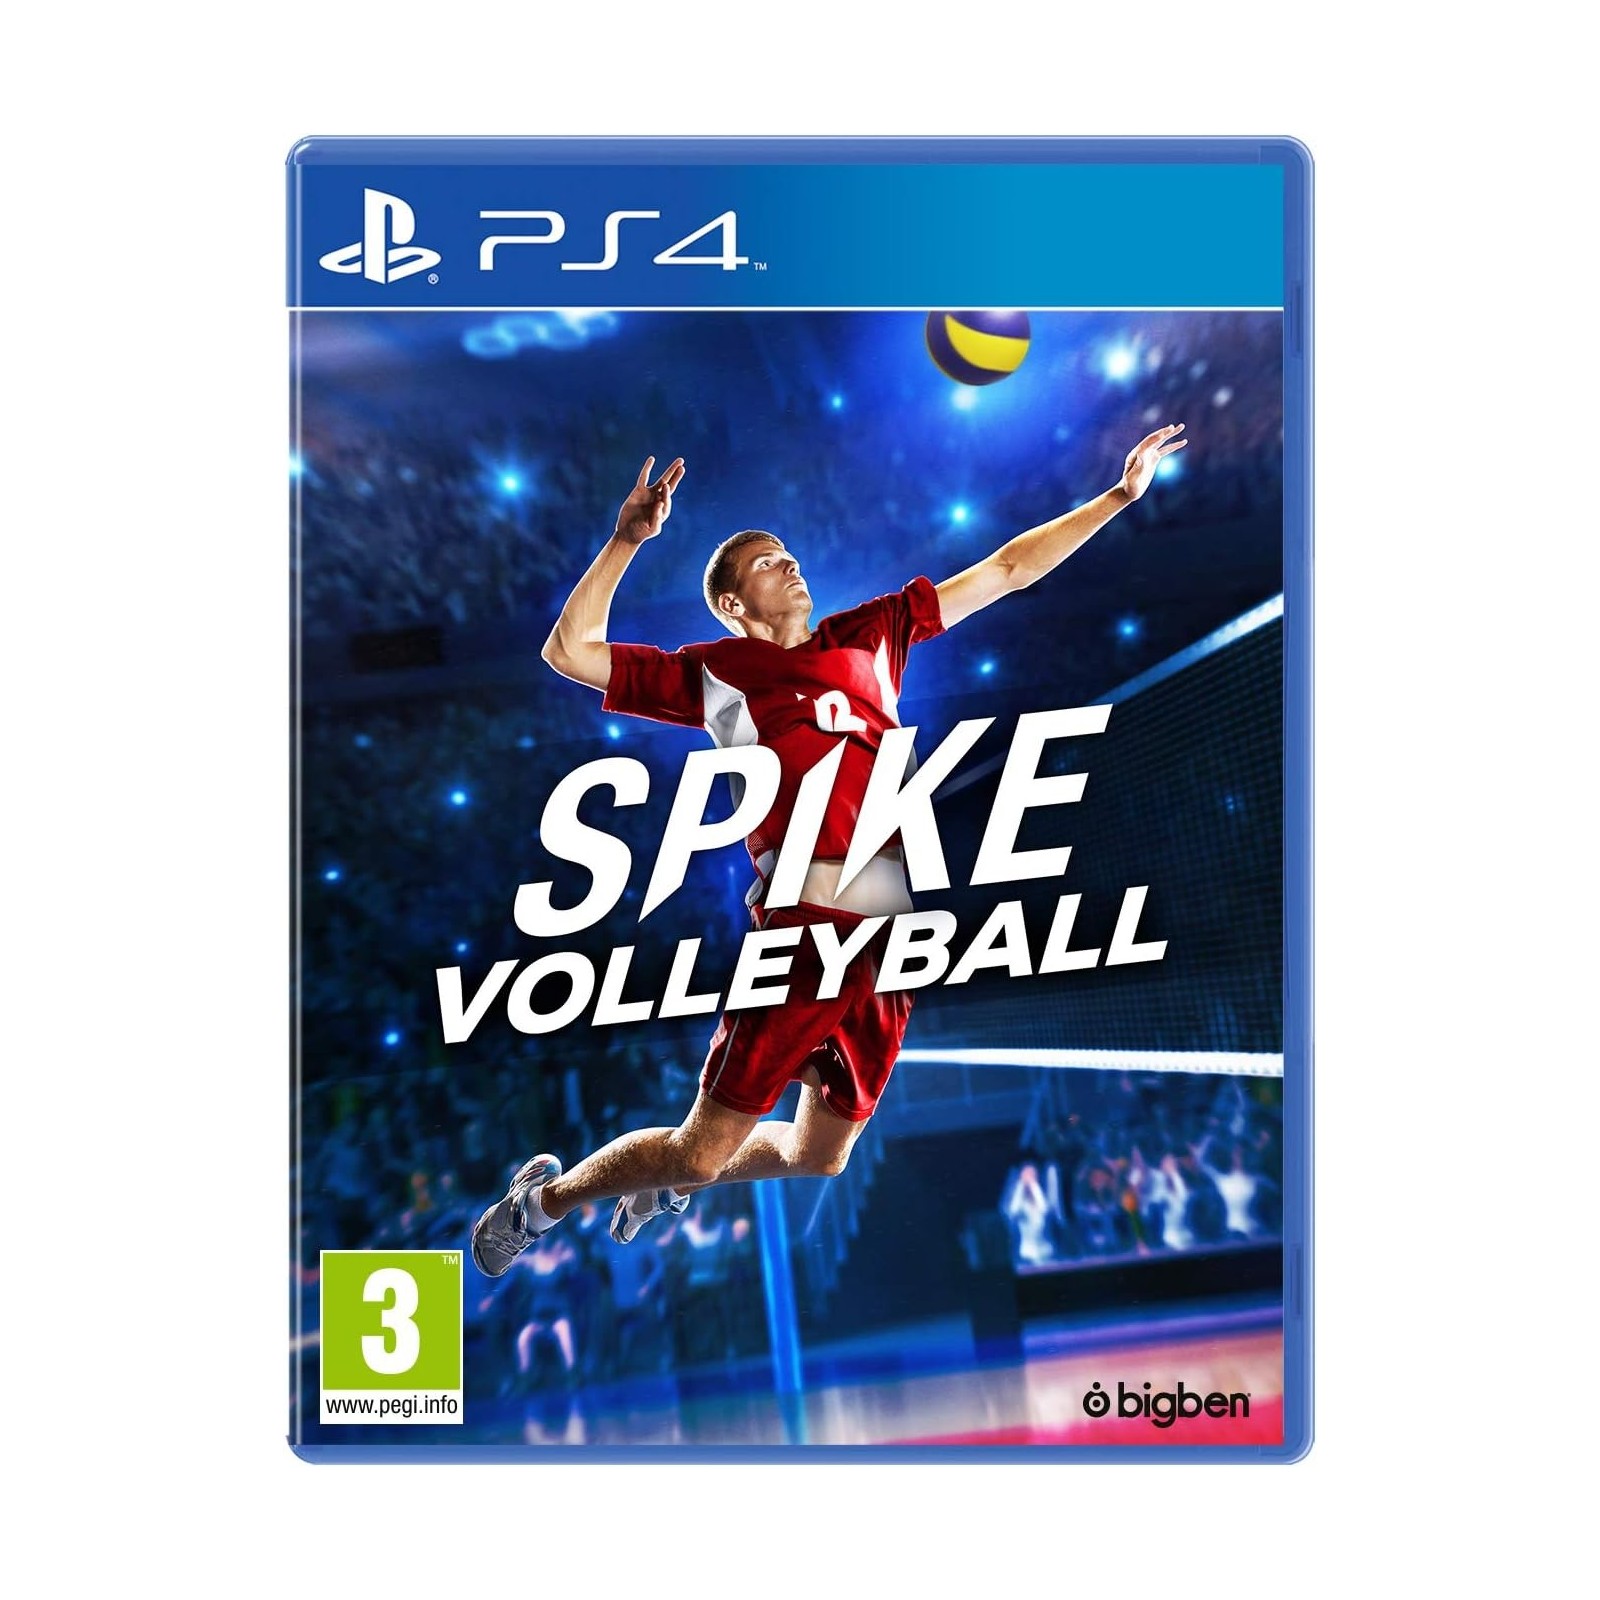 Spike Volleyball (FR/NL/Multi in Game)